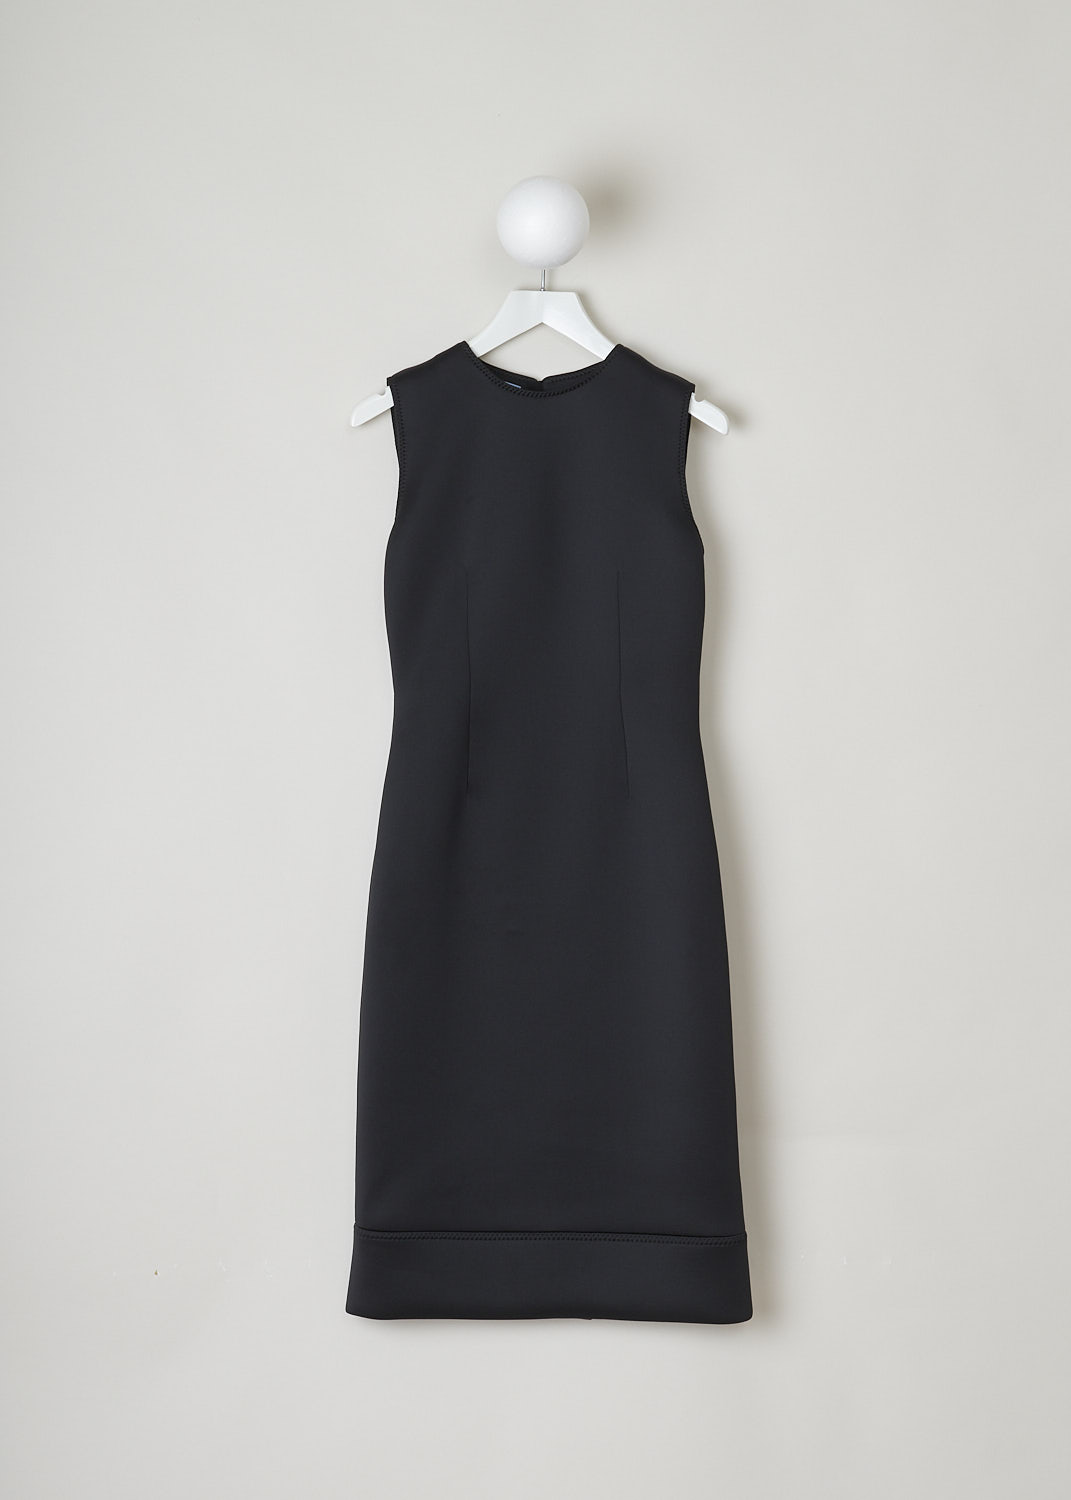 PRADA, BLACK SLEEVELESS SHEATH DRESS, P37H7_1SLI_F0002_JERSEY_DOPPIO_I_NERO, Black, Front, This black sleeveless sheath dress is made of a thick, neoprene-like fabric. This smooth, elasticated fabric hugs the body and is known not to wrinkles. The seams throughout the dress have a decorative zigzag pattern. The dress has a broad hemline. In the back, a concealed centre zip functions as the closure option. 
